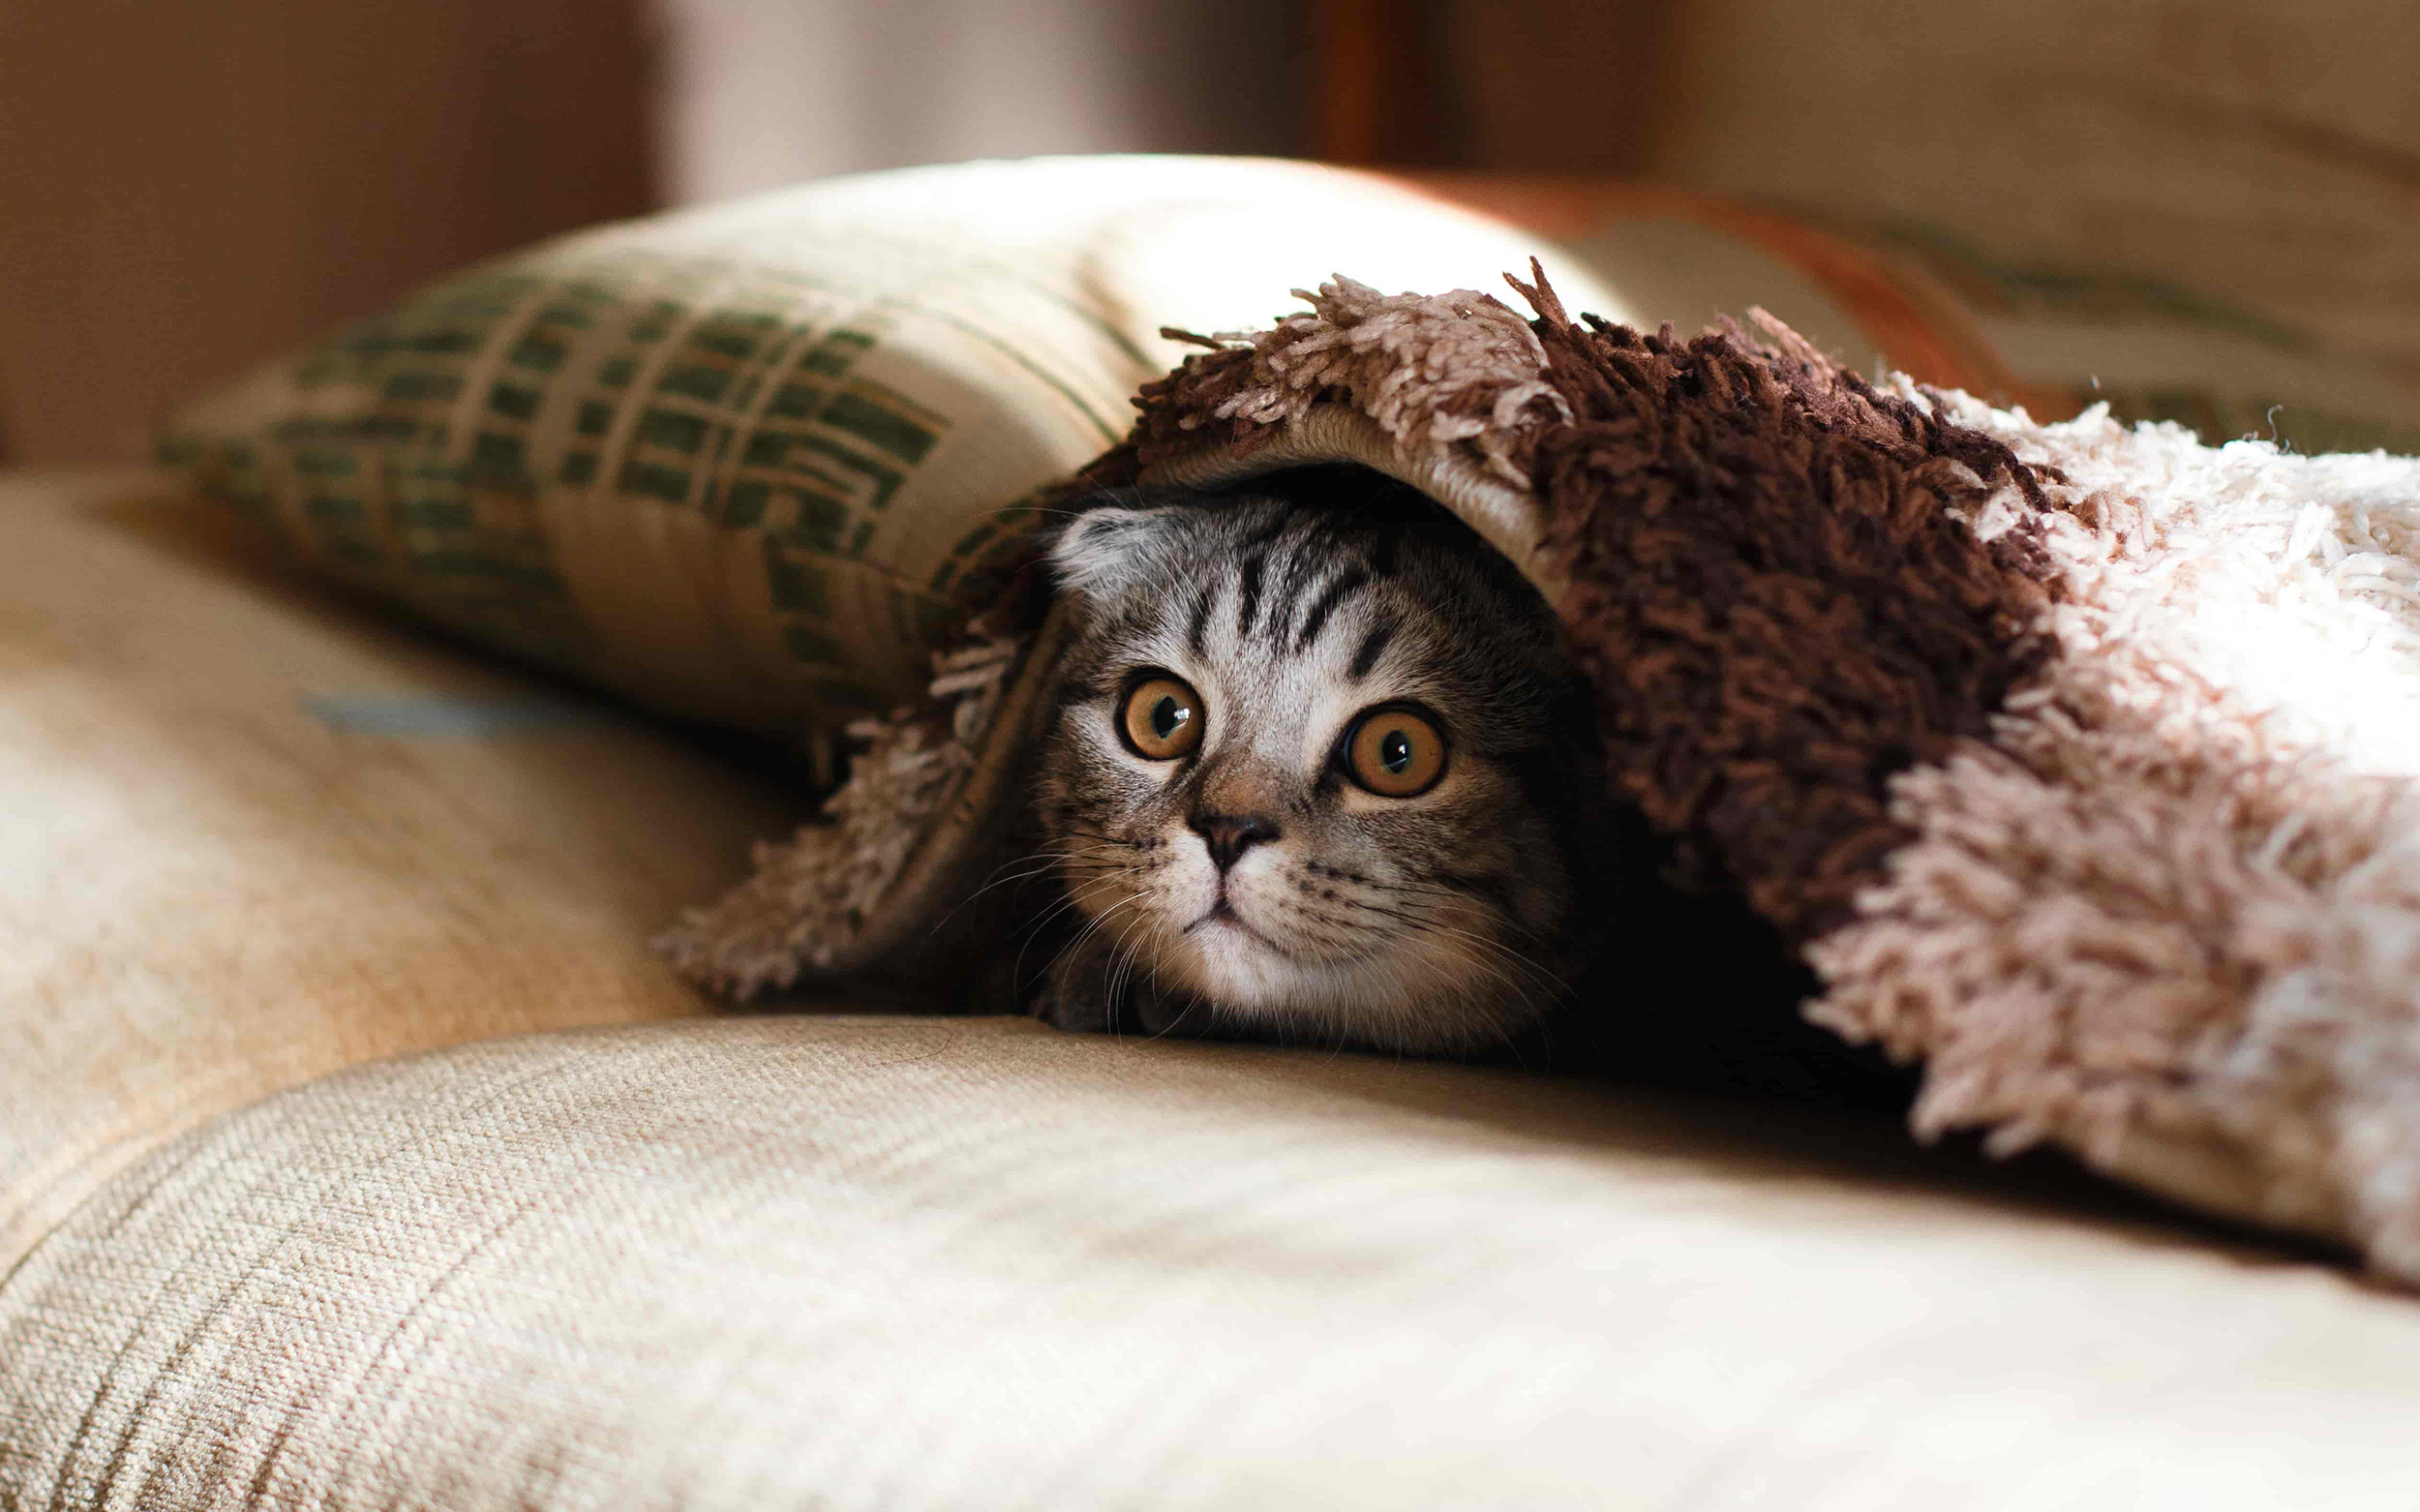 A cat hiding beneath a blanket, looking at the camera